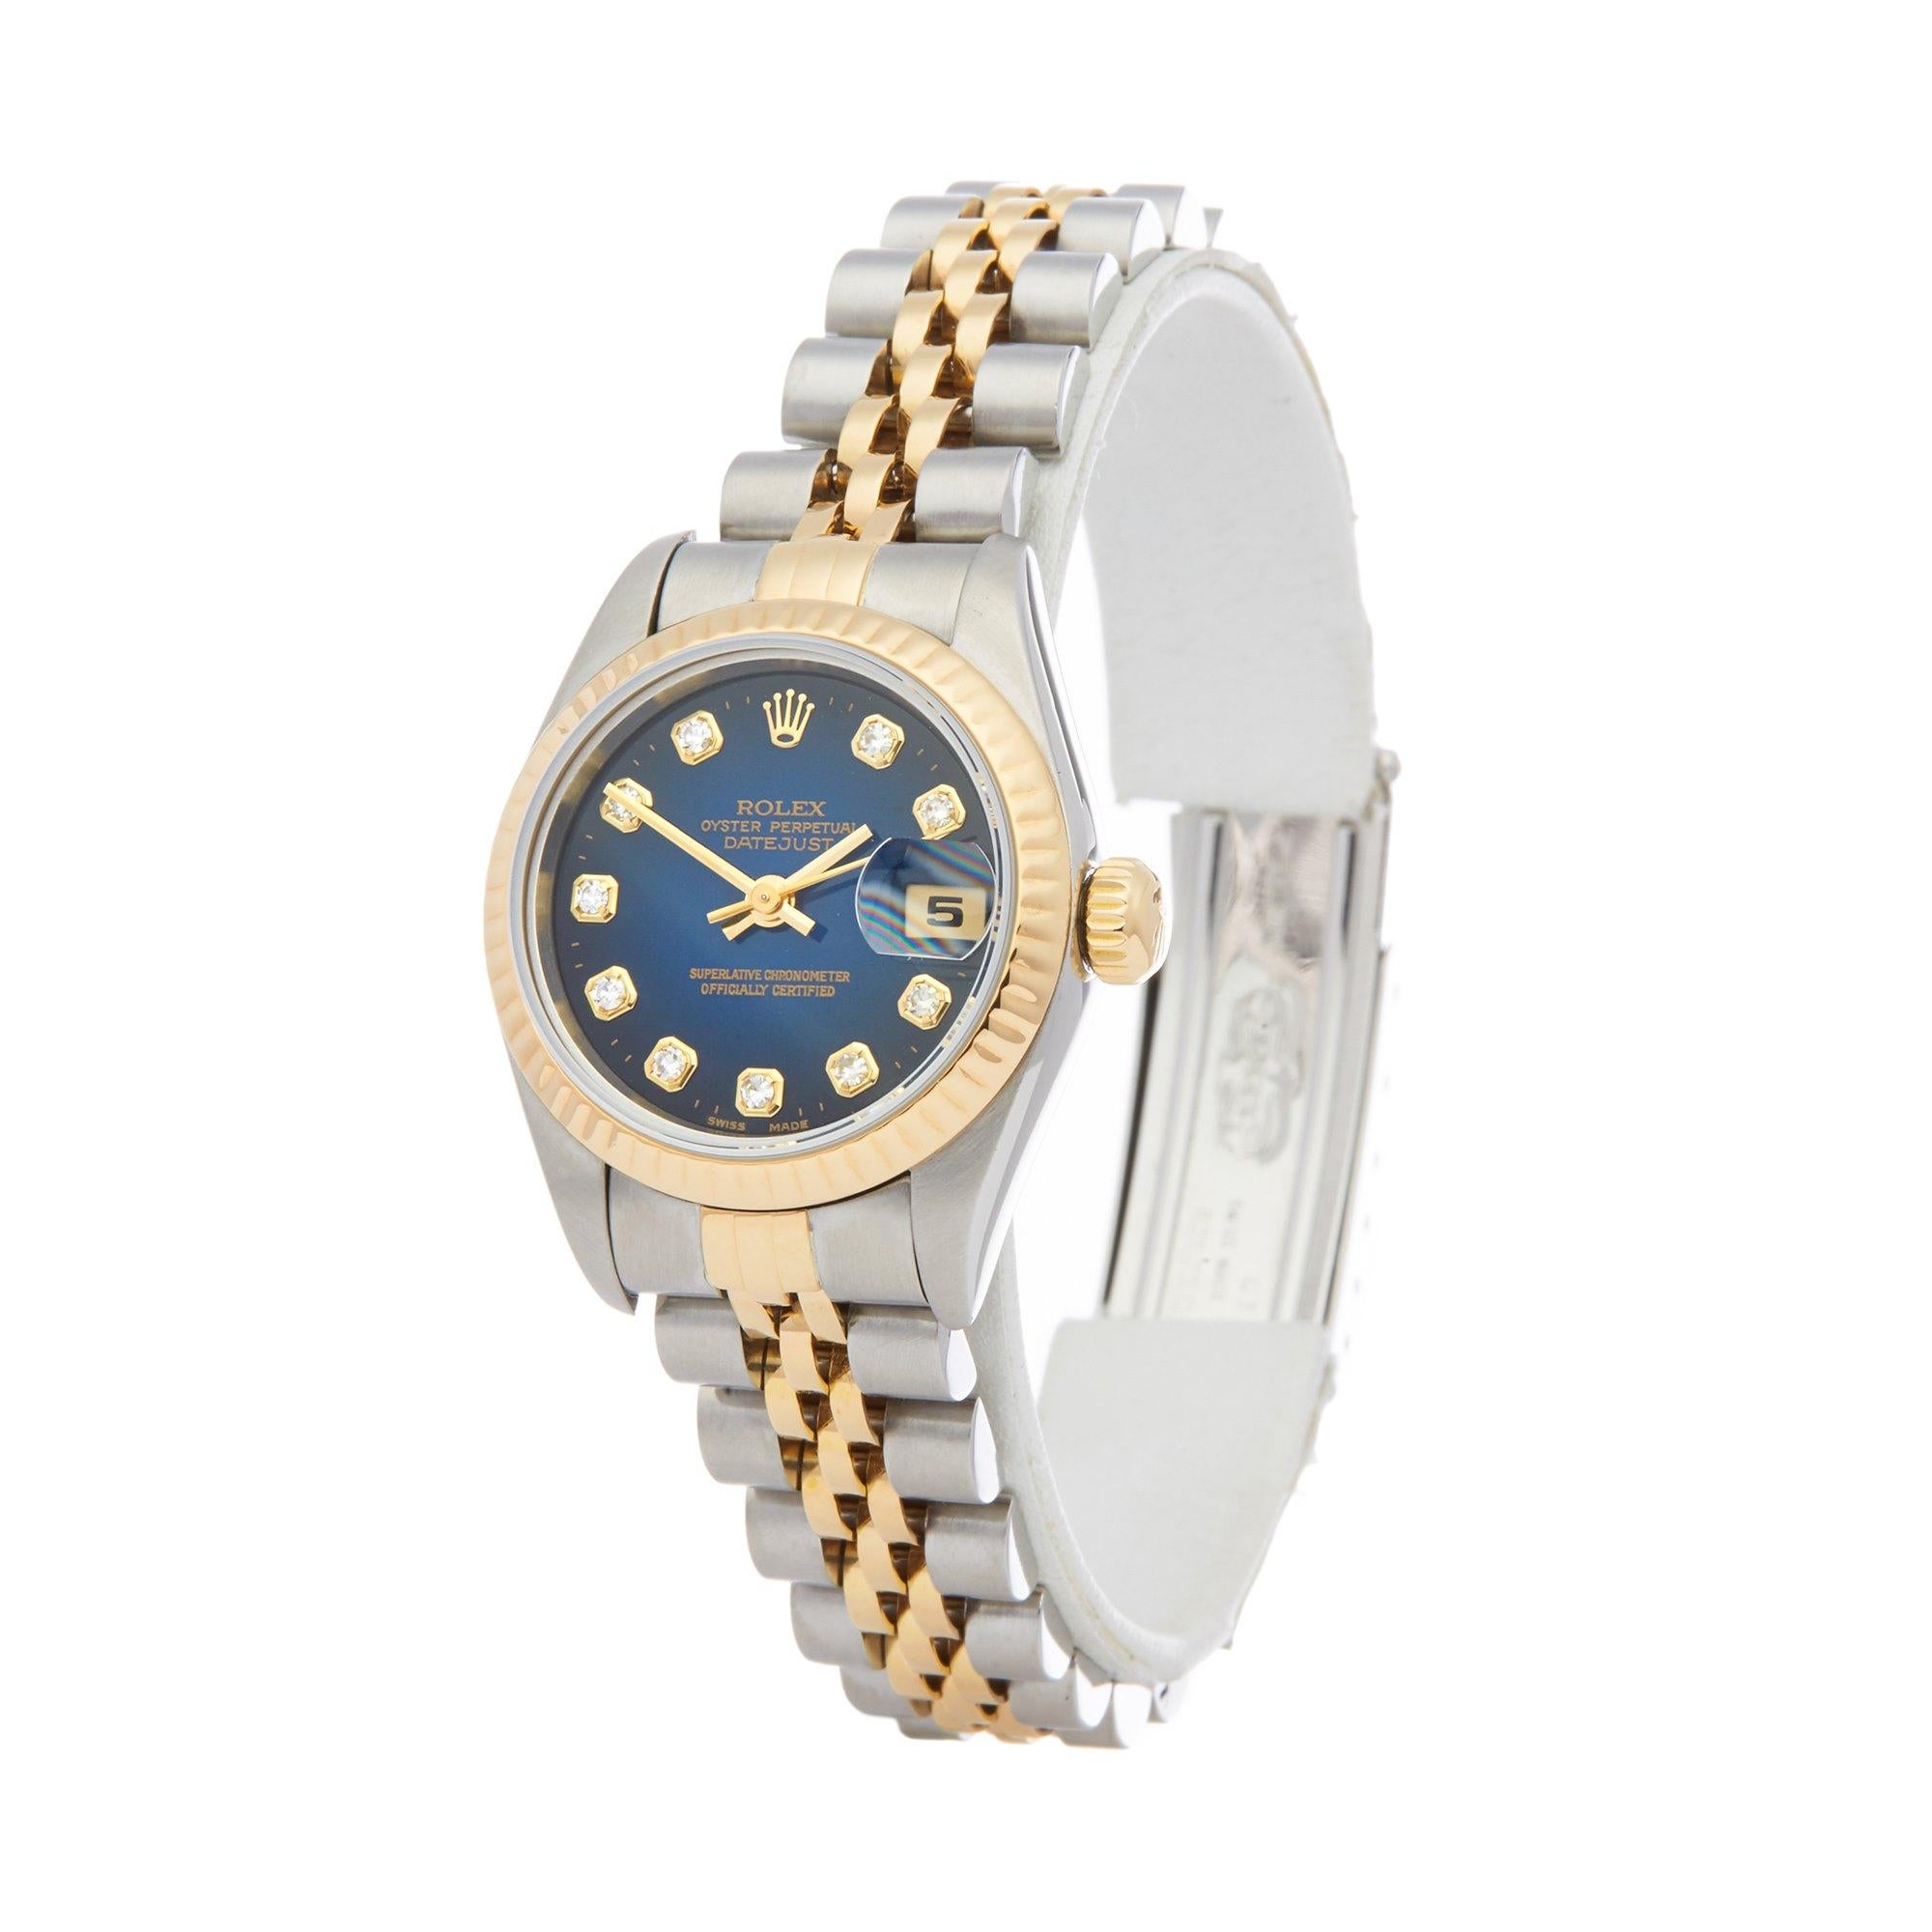 Xupes Reference: W007433
Manufacturer: Rolex
Model: Datejust
Model Variant: 26
Model Number: 69173
Age: 1997
Gender: Ladies
Complete With: Rolex Box
Dial: Blue Graduated With Diamond Markers
Glass: Sapphire Crystal
Case Size: 26mm
Case Material: